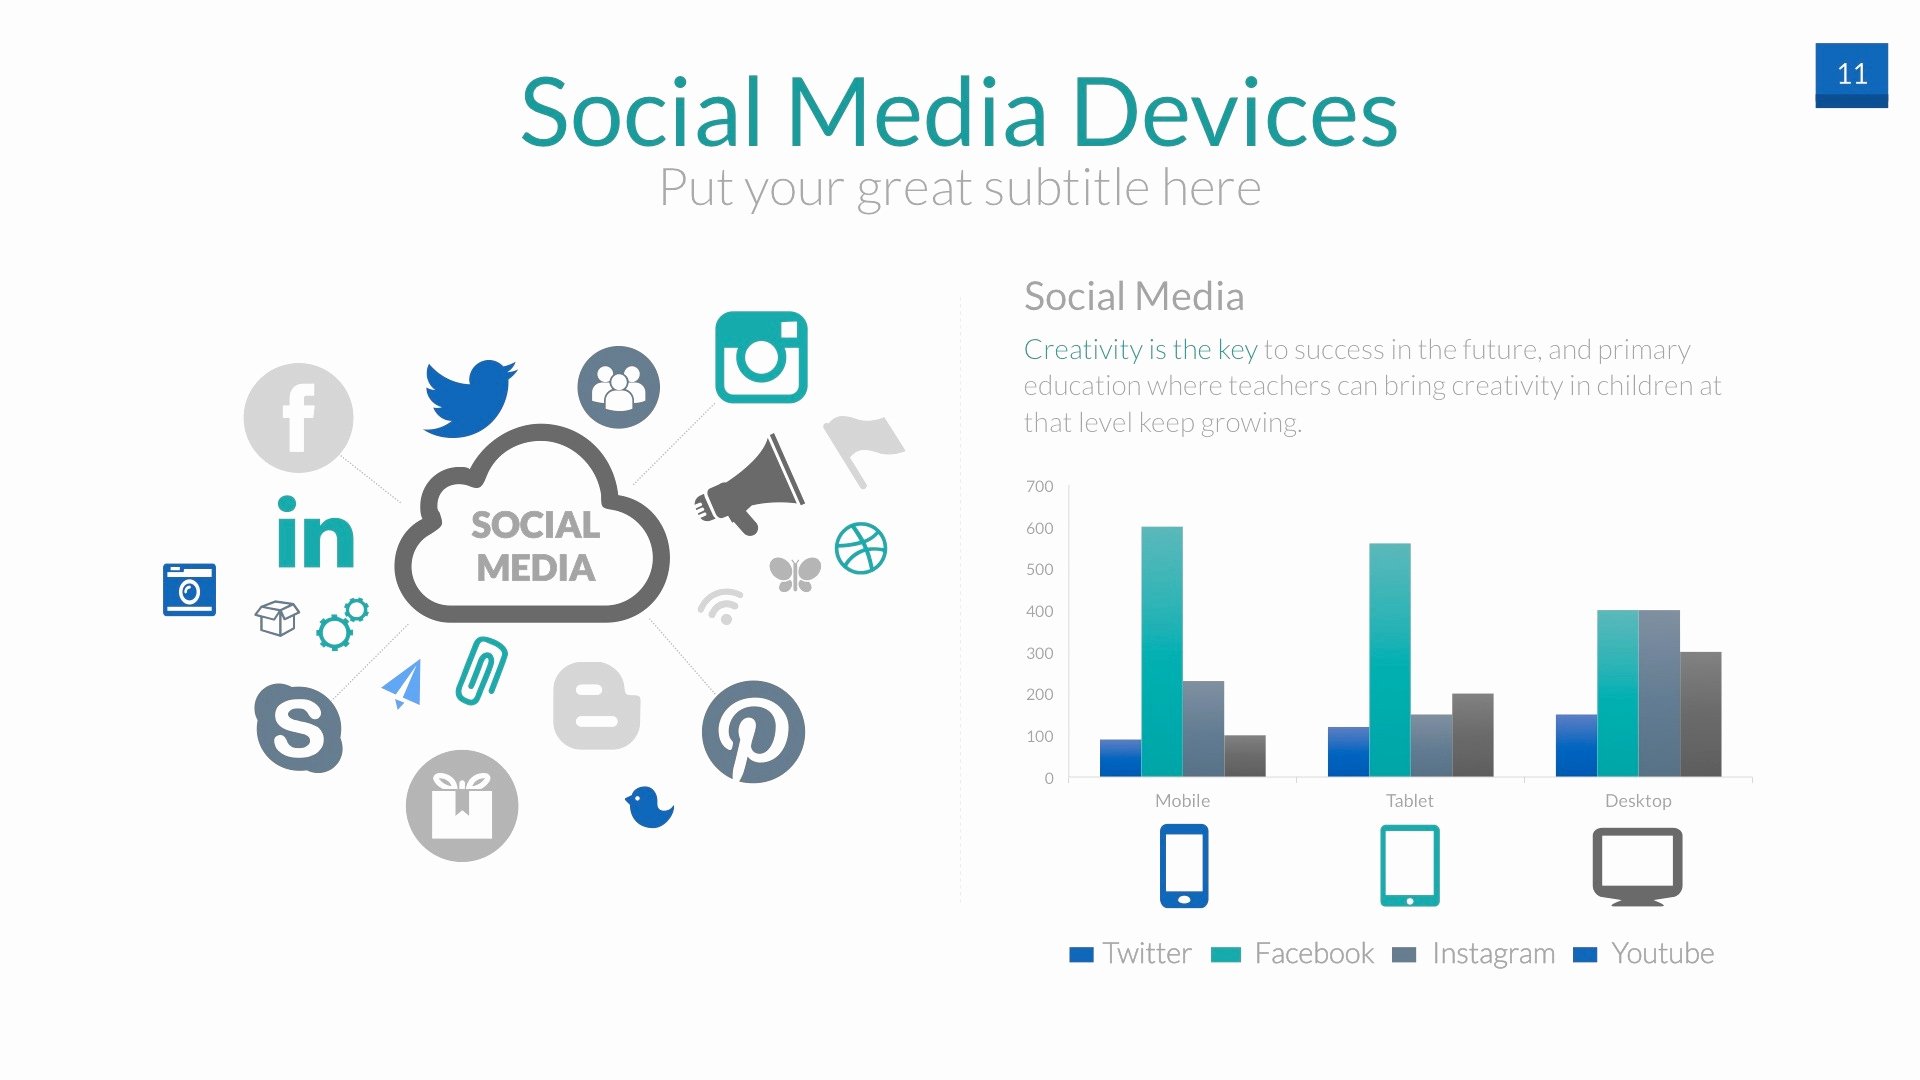 Social Media Powerpoint Presentation Template by